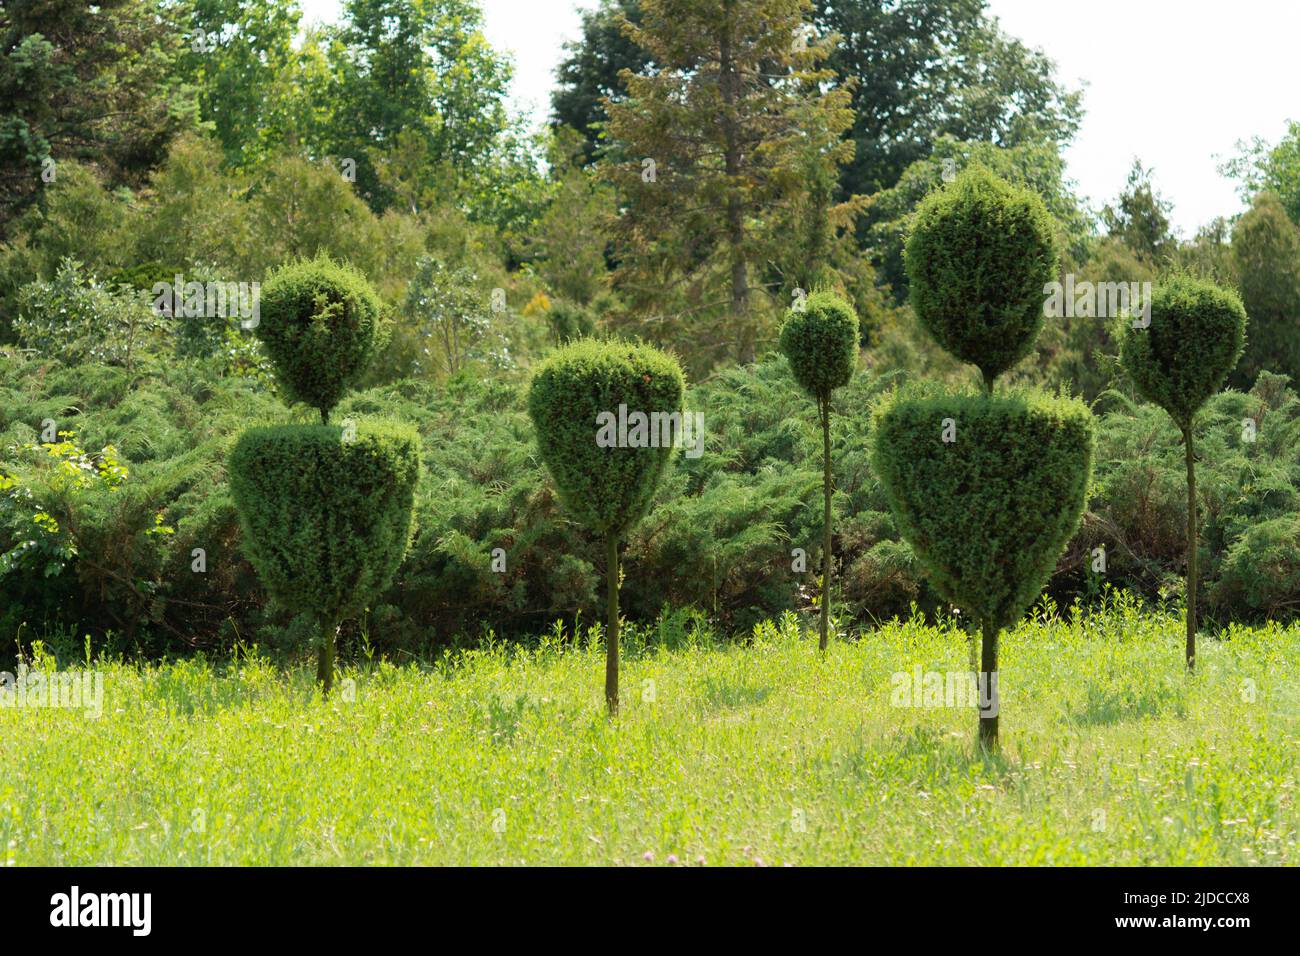 Topiary art in the arboretum. Trimmed trees and shrubs in the arboretum. Green Thuja in the City Park Stock Photo